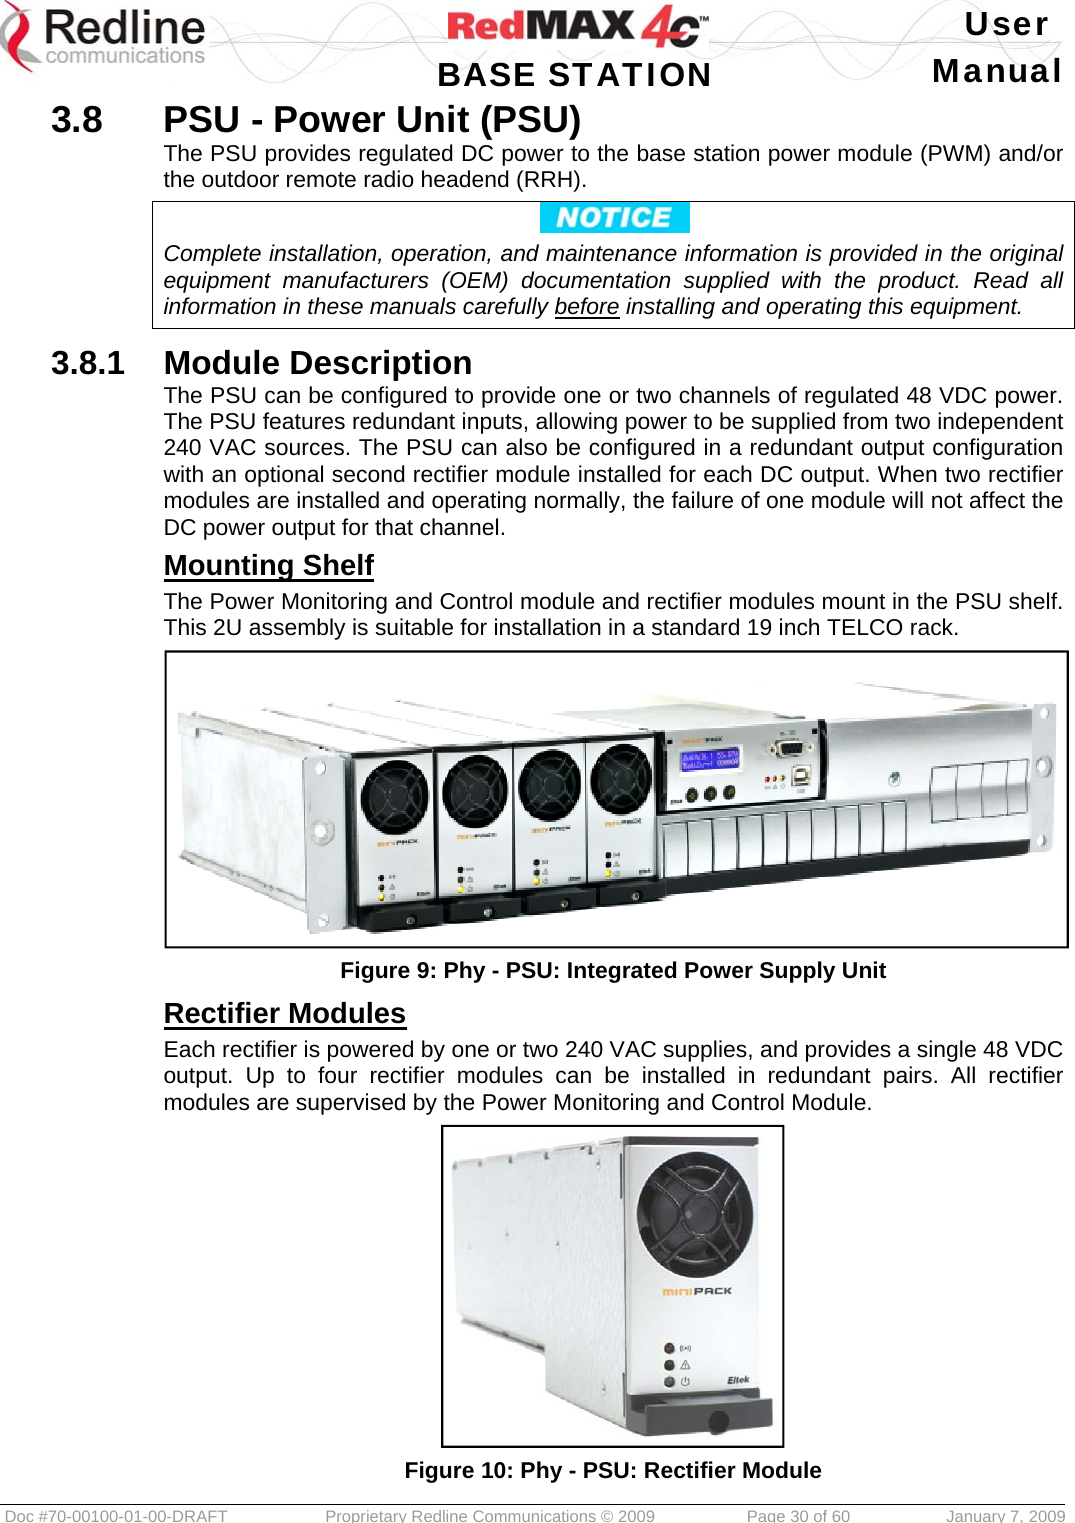   User  BASE STATION Manual  Doc #70-00100-01-00-DRAFT  Proprietary Redline Communications © 2009   Page 30 of 60  January 7, 2009 3.8  PSU - Power Unit (PSU) The PSU provides regulated DC power to the base station power module (PWM) and/or the outdoor remote radio headend (RRH).  Complete installation, operation, and maintenance information is provided in the original equipment manufacturers (OEM) documentation supplied with the product. Read all information in these manuals carefully before installing and operating this equipment.  3.8.1  Module Description The PSU can be configured to provide one or two channels of regulated 48 VDC power. The PSU features redundant inputs, allowing power to be supplied from two independent 240 VAC sources. The PSU can also be configured in a redundant output configuration with an optional second rectifier module installed for each DC output. When two rectifier modules are installed and operating normally, the failure of one module will not affect the DC power output for that channel. Mounting Shelf The Power Monitoring and Control module and rectifier modules mount in the PSU shelf. This 2U assembly is suitable for installation in a standard 19 inch TELCO rack.  Figure 9: Phy - PSU: Integrated Power Supply Unit Rectifier Modules Each rectifier is powered by one or two 240 VAC supplies, and provides a single 48 VDC output. Up to four rectifier modules can be installed in redundant pairs. All rectifier modules are supervised by the Power Monitoring and Control Module.  Figure 10: Phy - PSU: Rectifier Module 